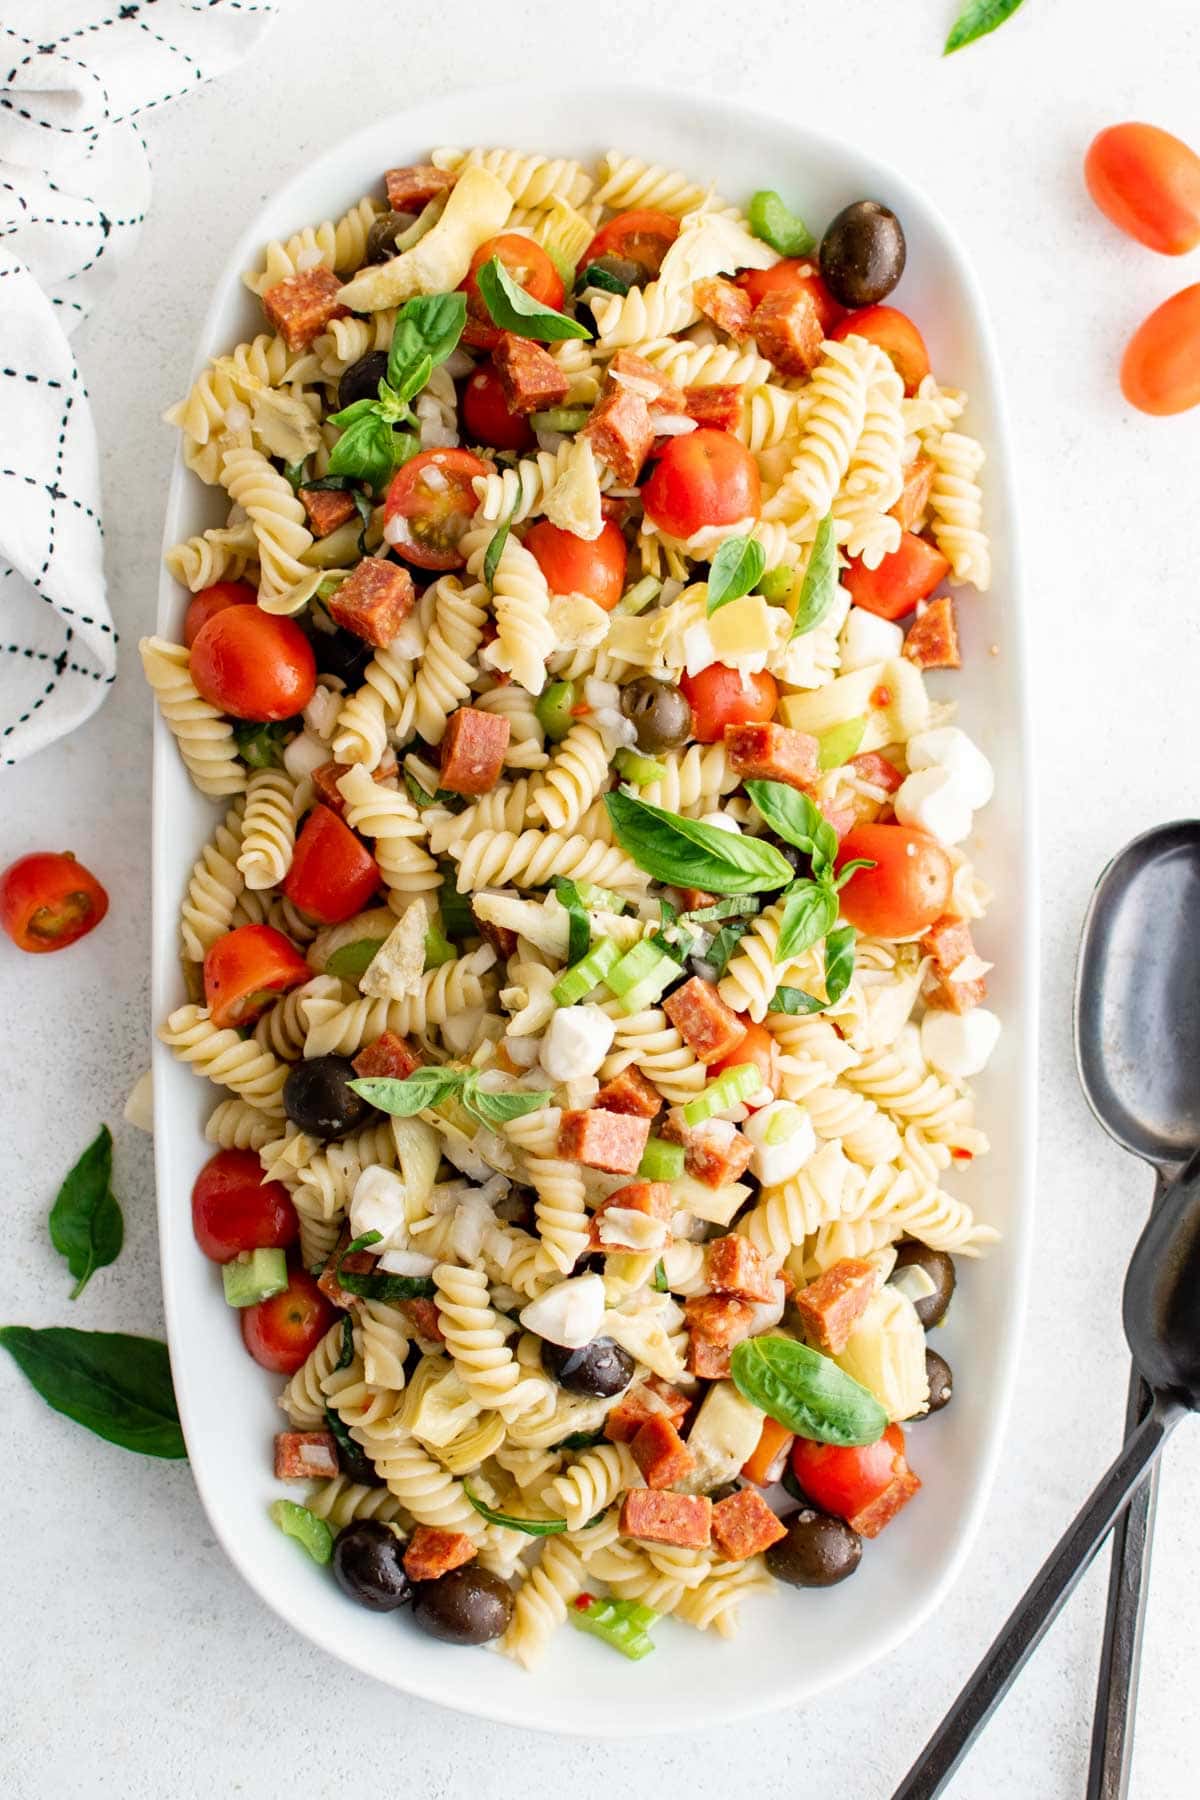 Rotini pasta, tomatoes, olives, cheese and salami in hte form of a pasta salad on a large platter.